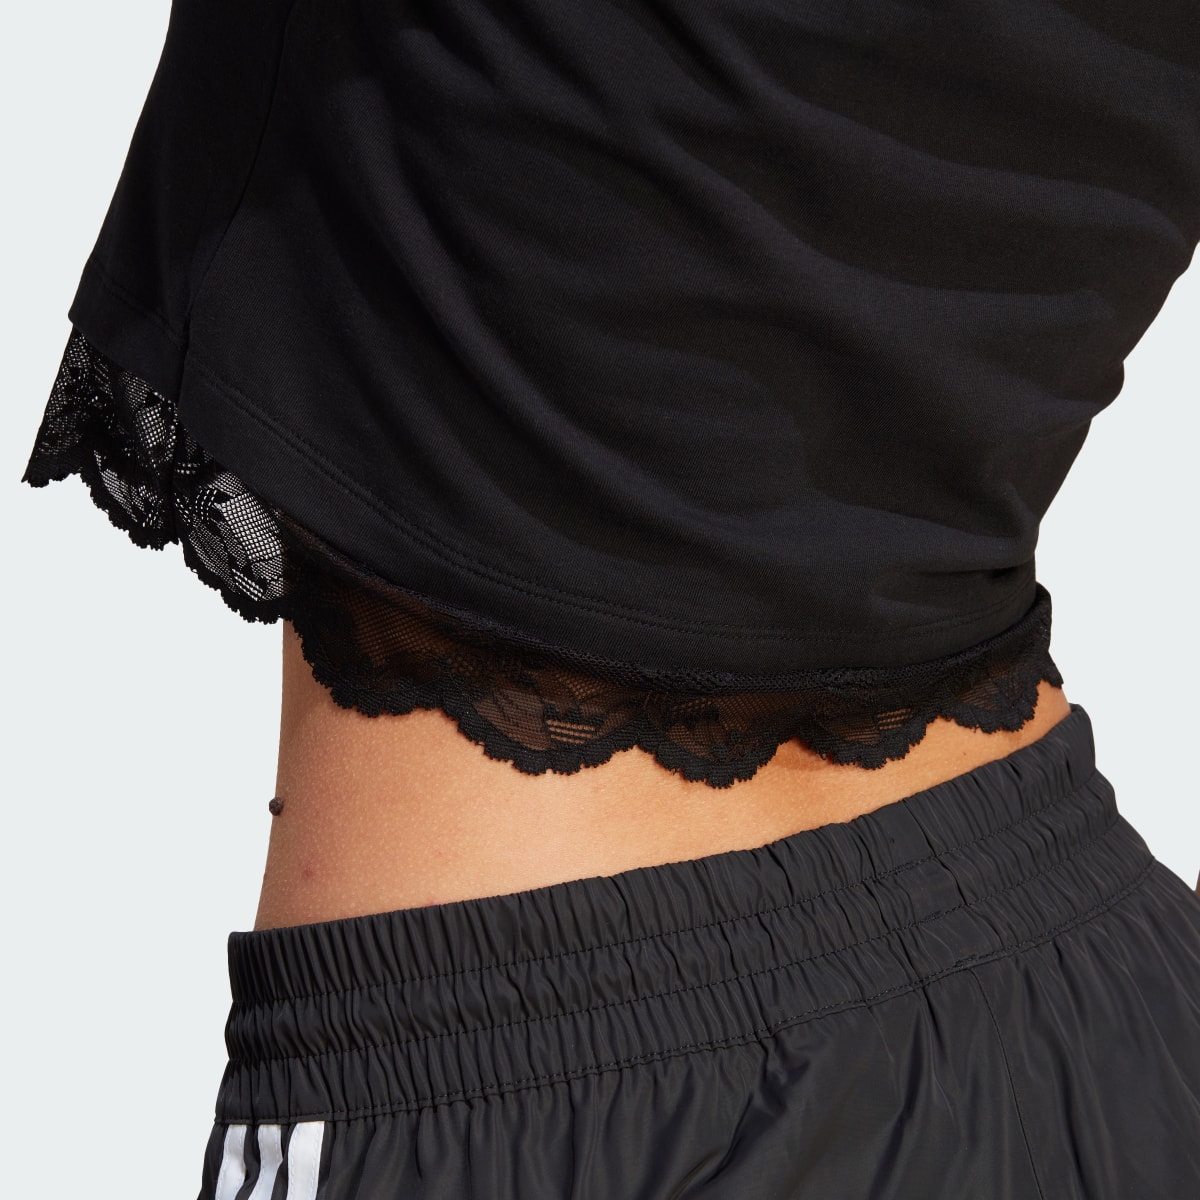 Adidas Cropped Lace Trim Tee. 7